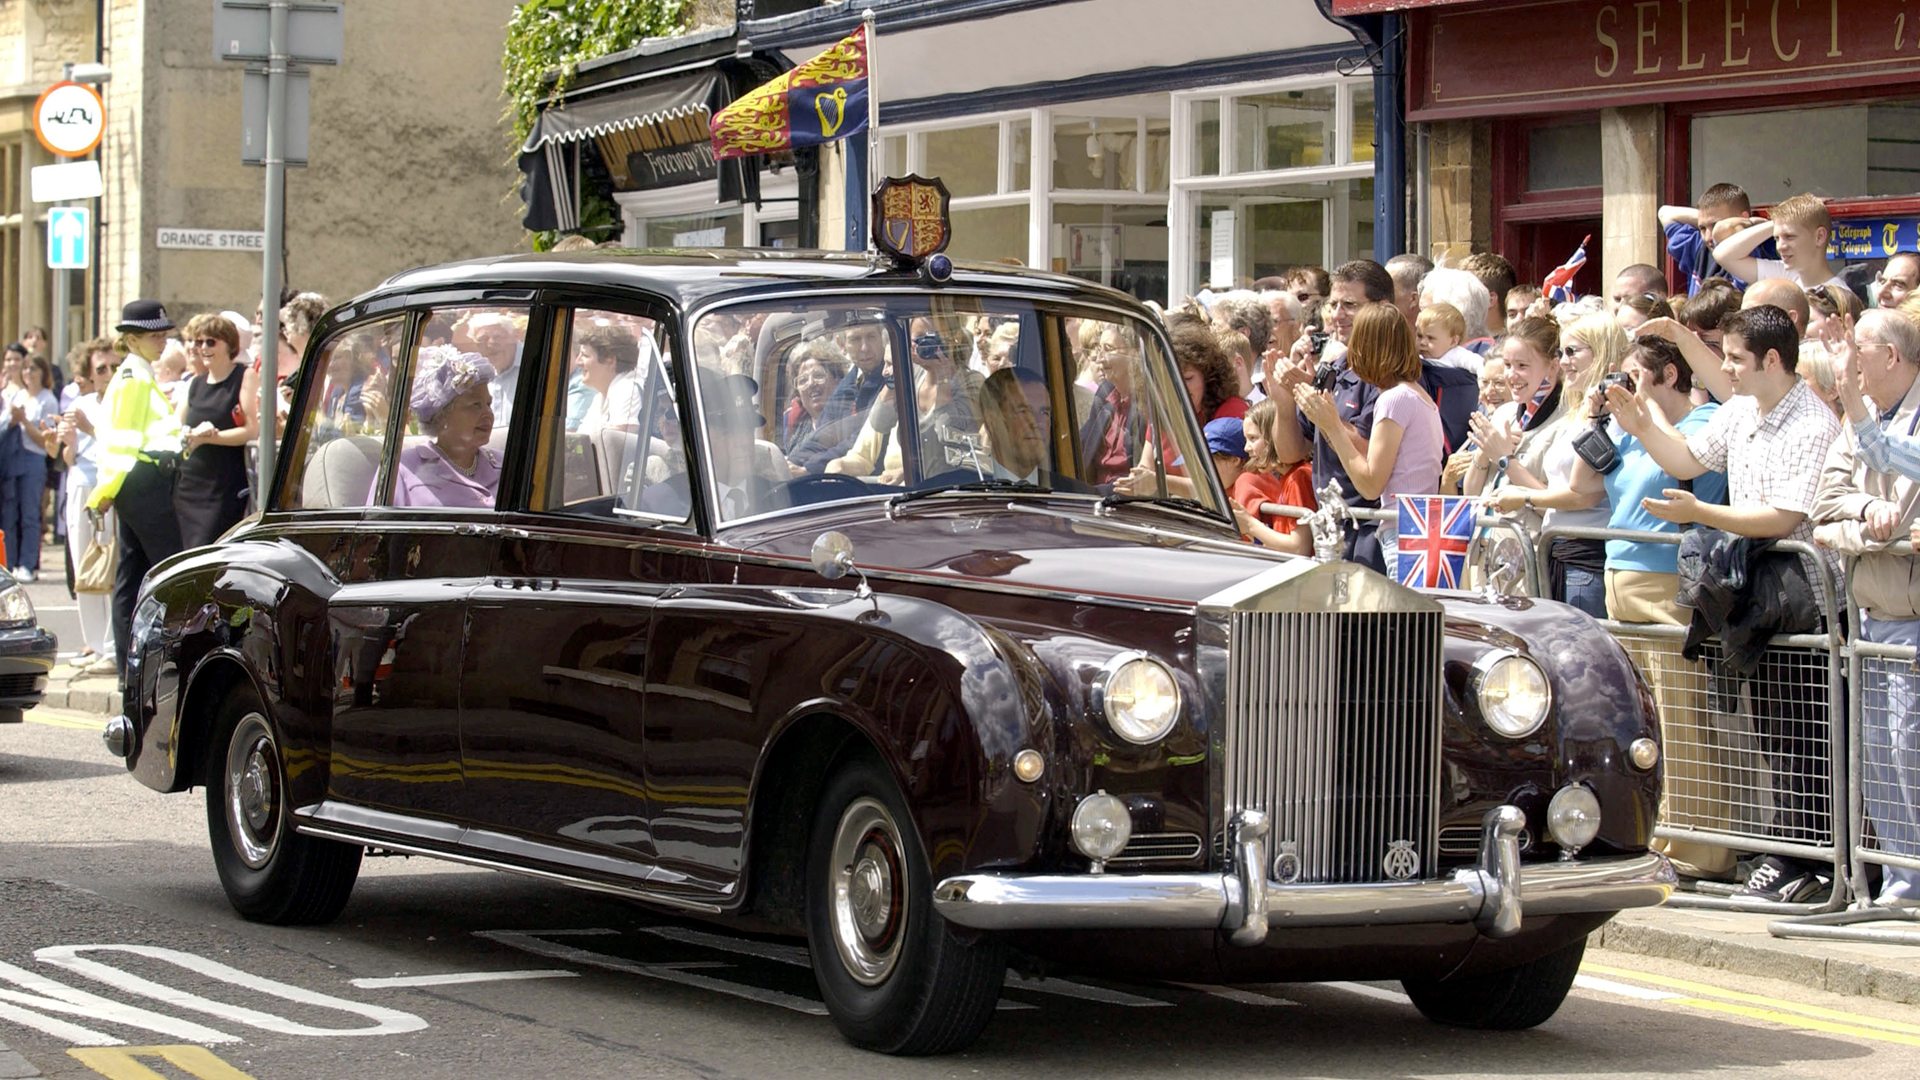 The Rolls-Royce Phantom V, still with the same headlights on each side, would be replaced by a very similar car, the Phantom VI, still used by royalty. 